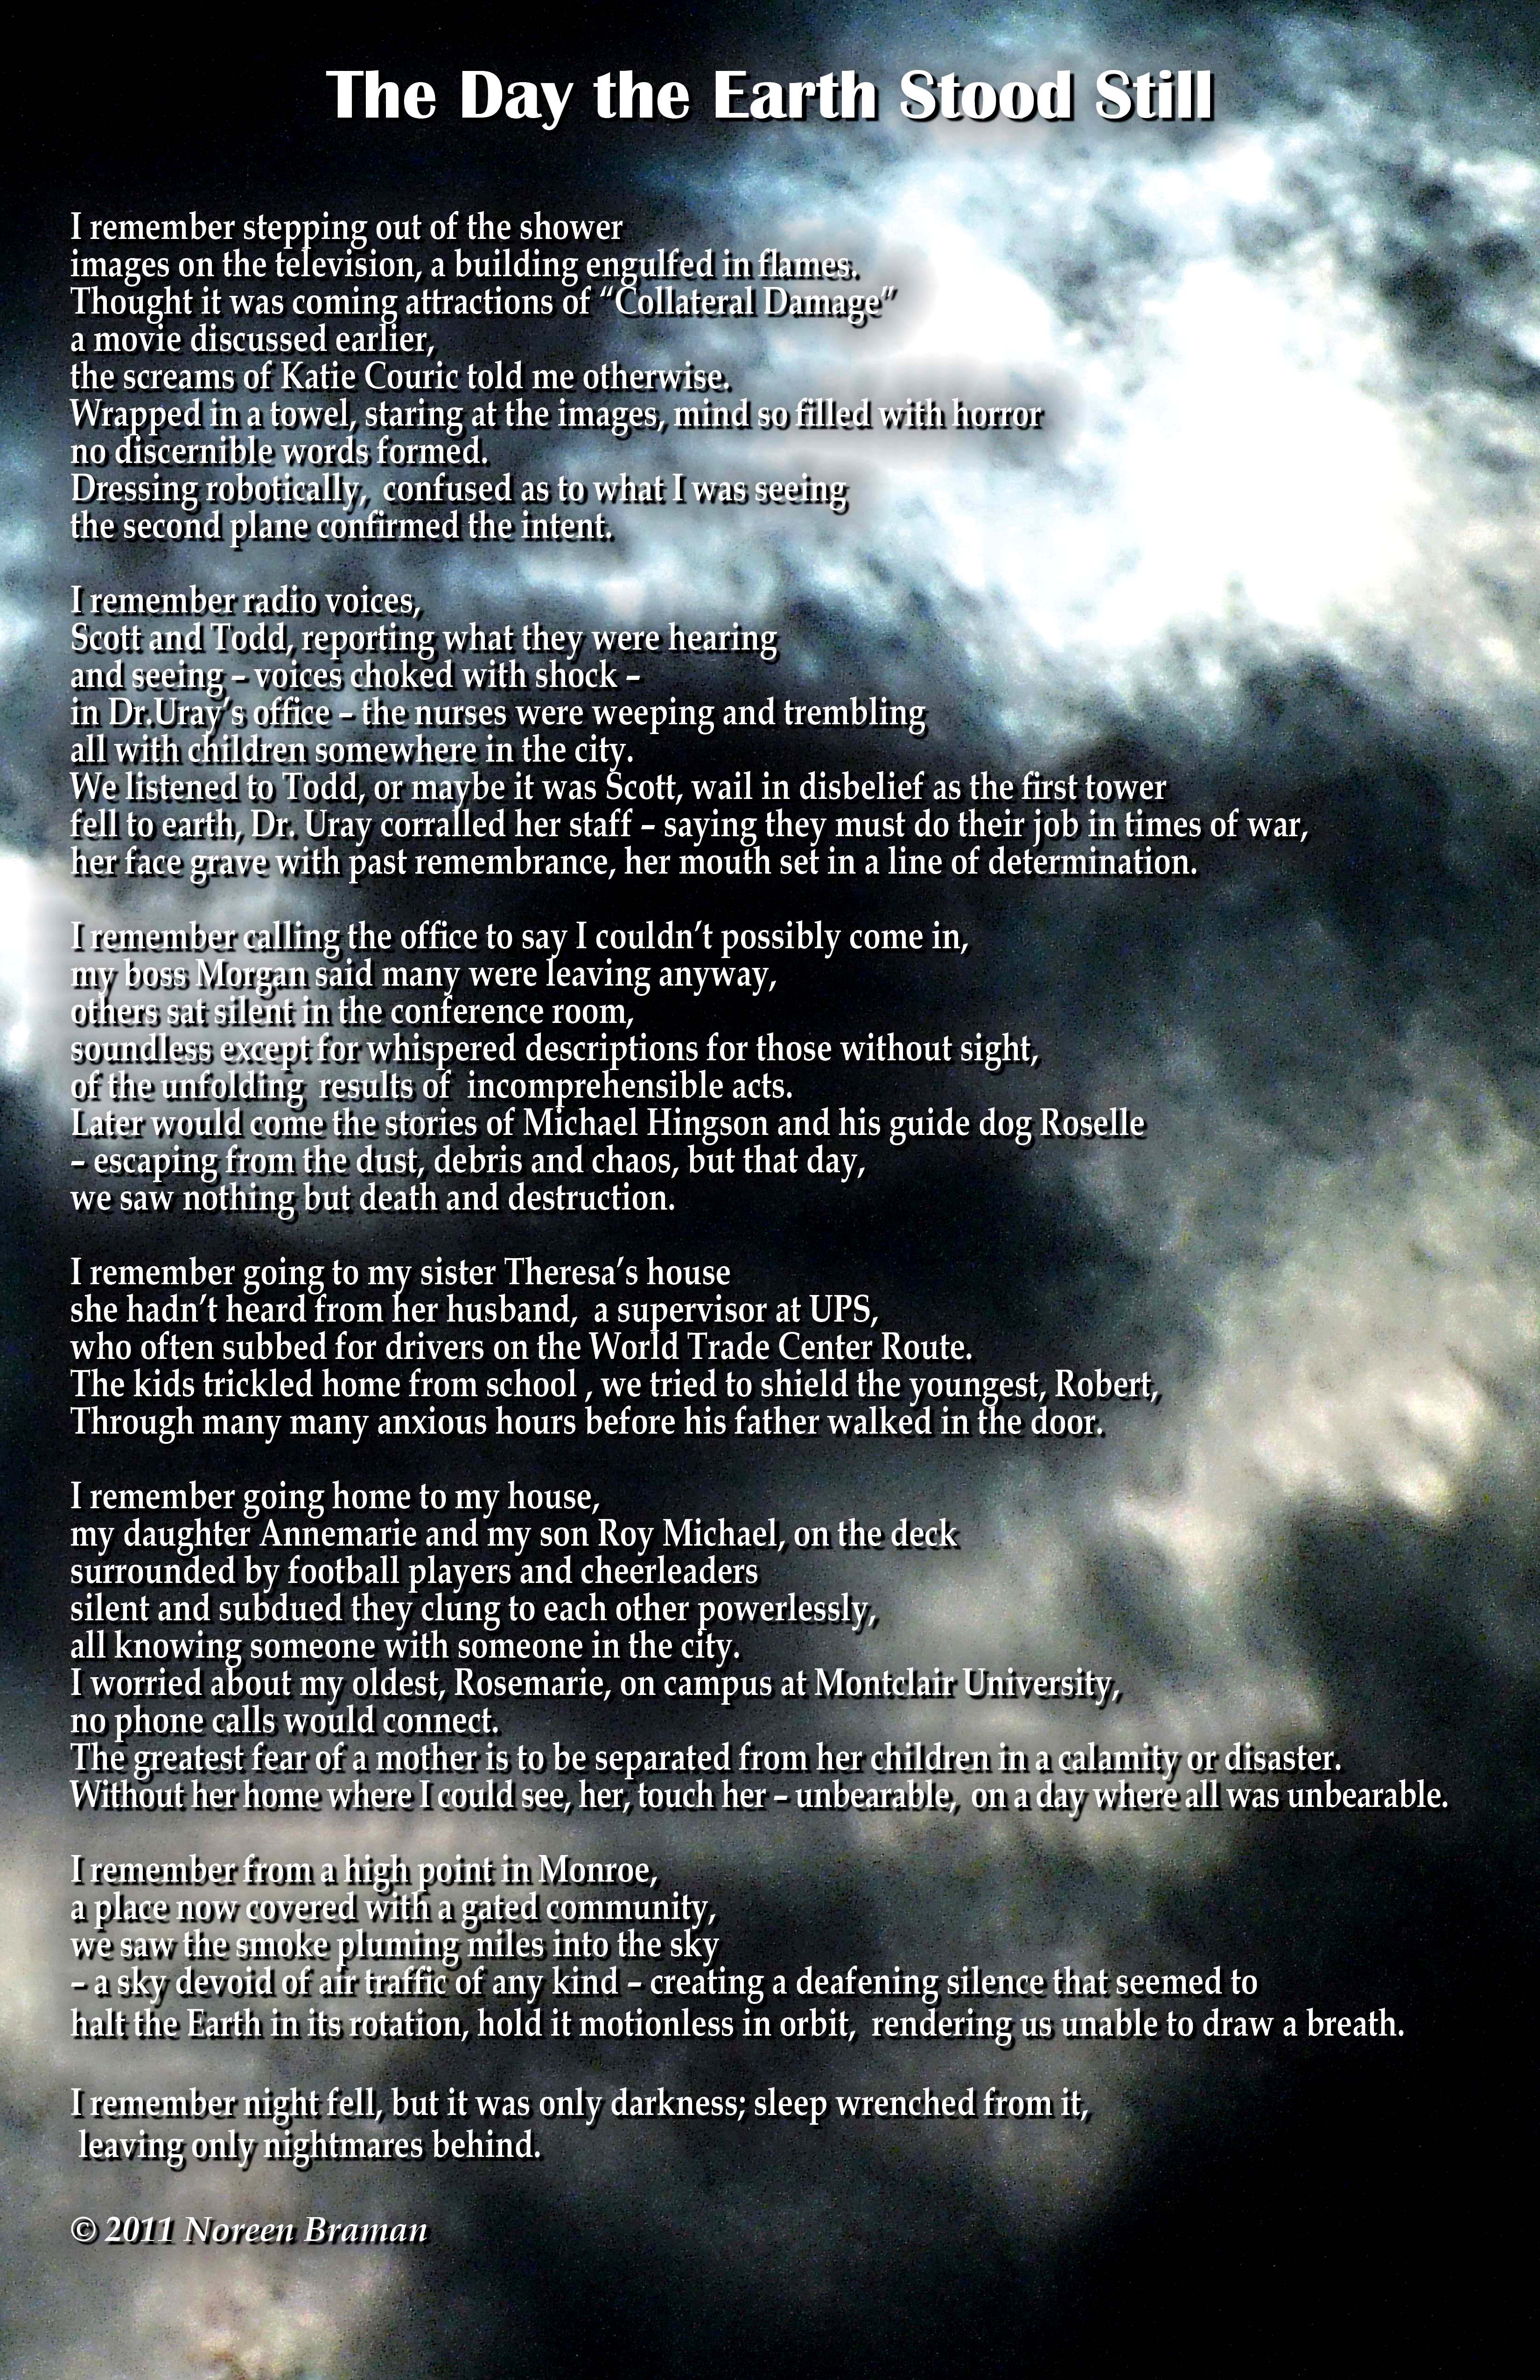 A first person narrative poem, written over a sky of blackened clouds and smoke. Text of the poem can be read at https://link.medium.com/ZD206b4aT9 